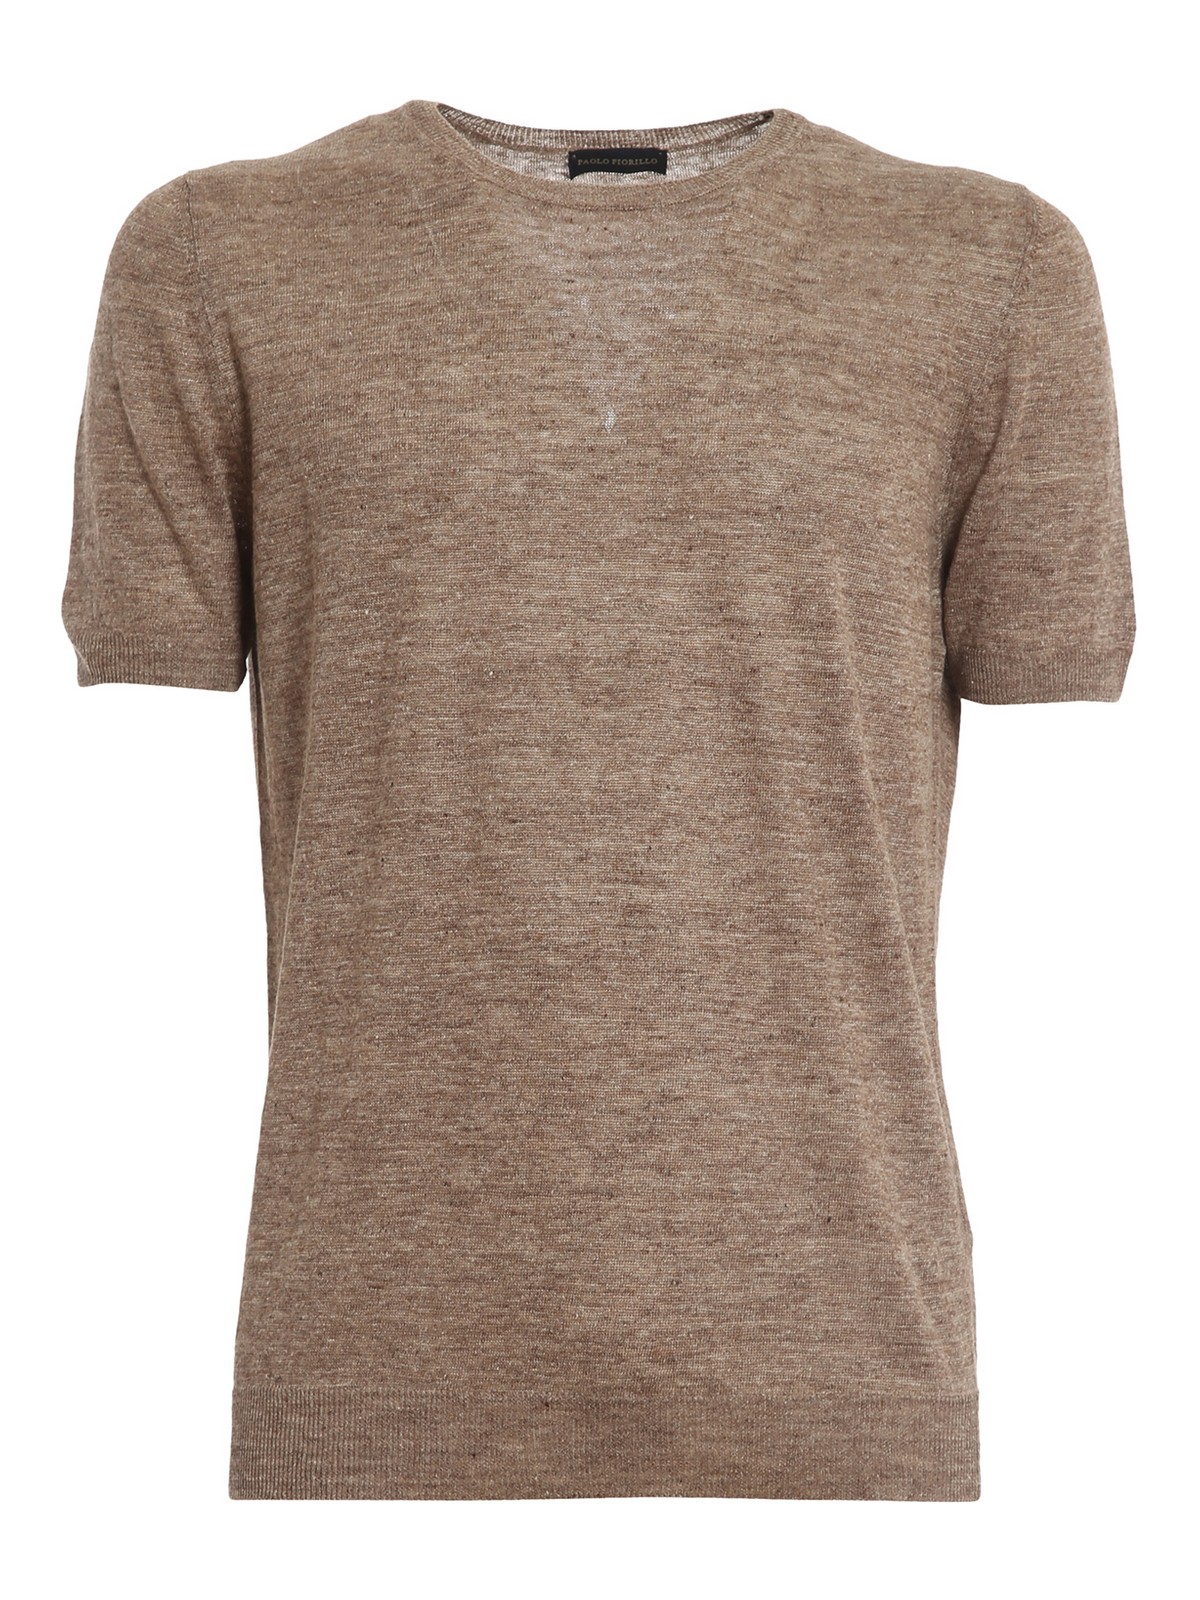 Paolo Fiorillo Linen Short Sleeved Sweater In Brown